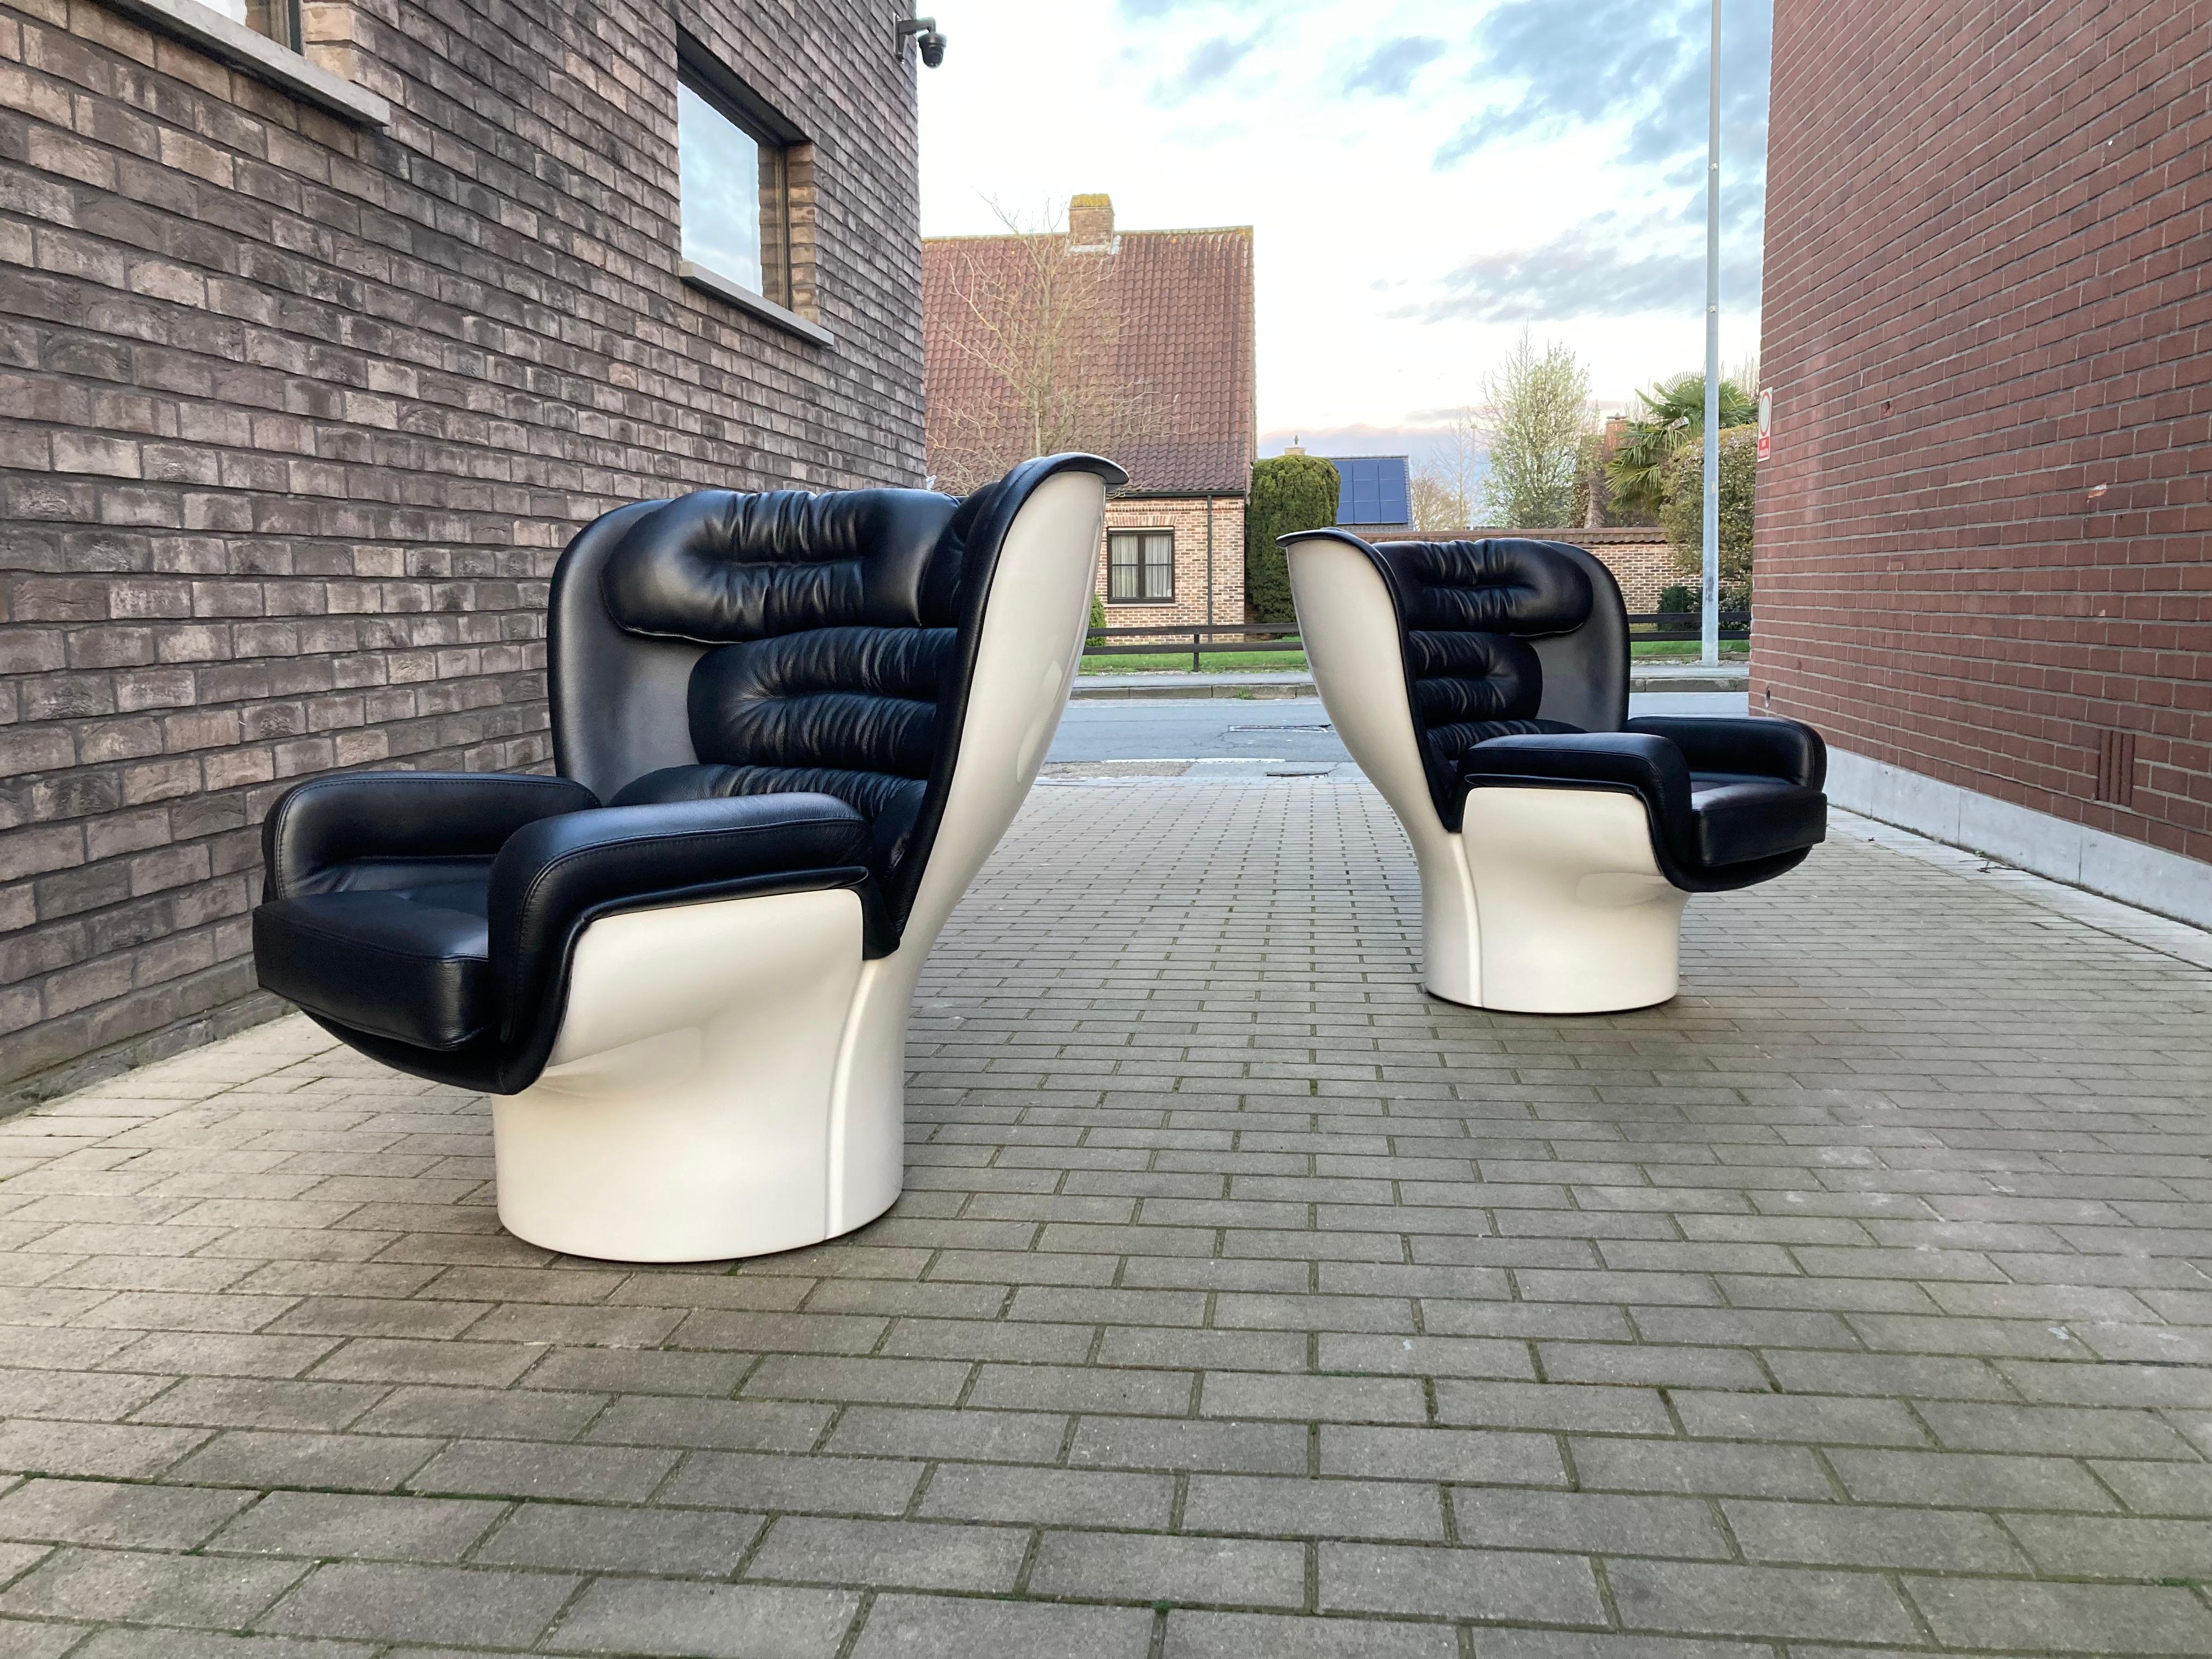 2 Showroom models in impeccable NEW condition!
Iconic Space Age classics: Elda Chair by Joe Colombo (1963- Italy).
360 degree rotatable base (swivel).

With certificate of authenticity and warranty!

Black leather with a beautiful grain of the